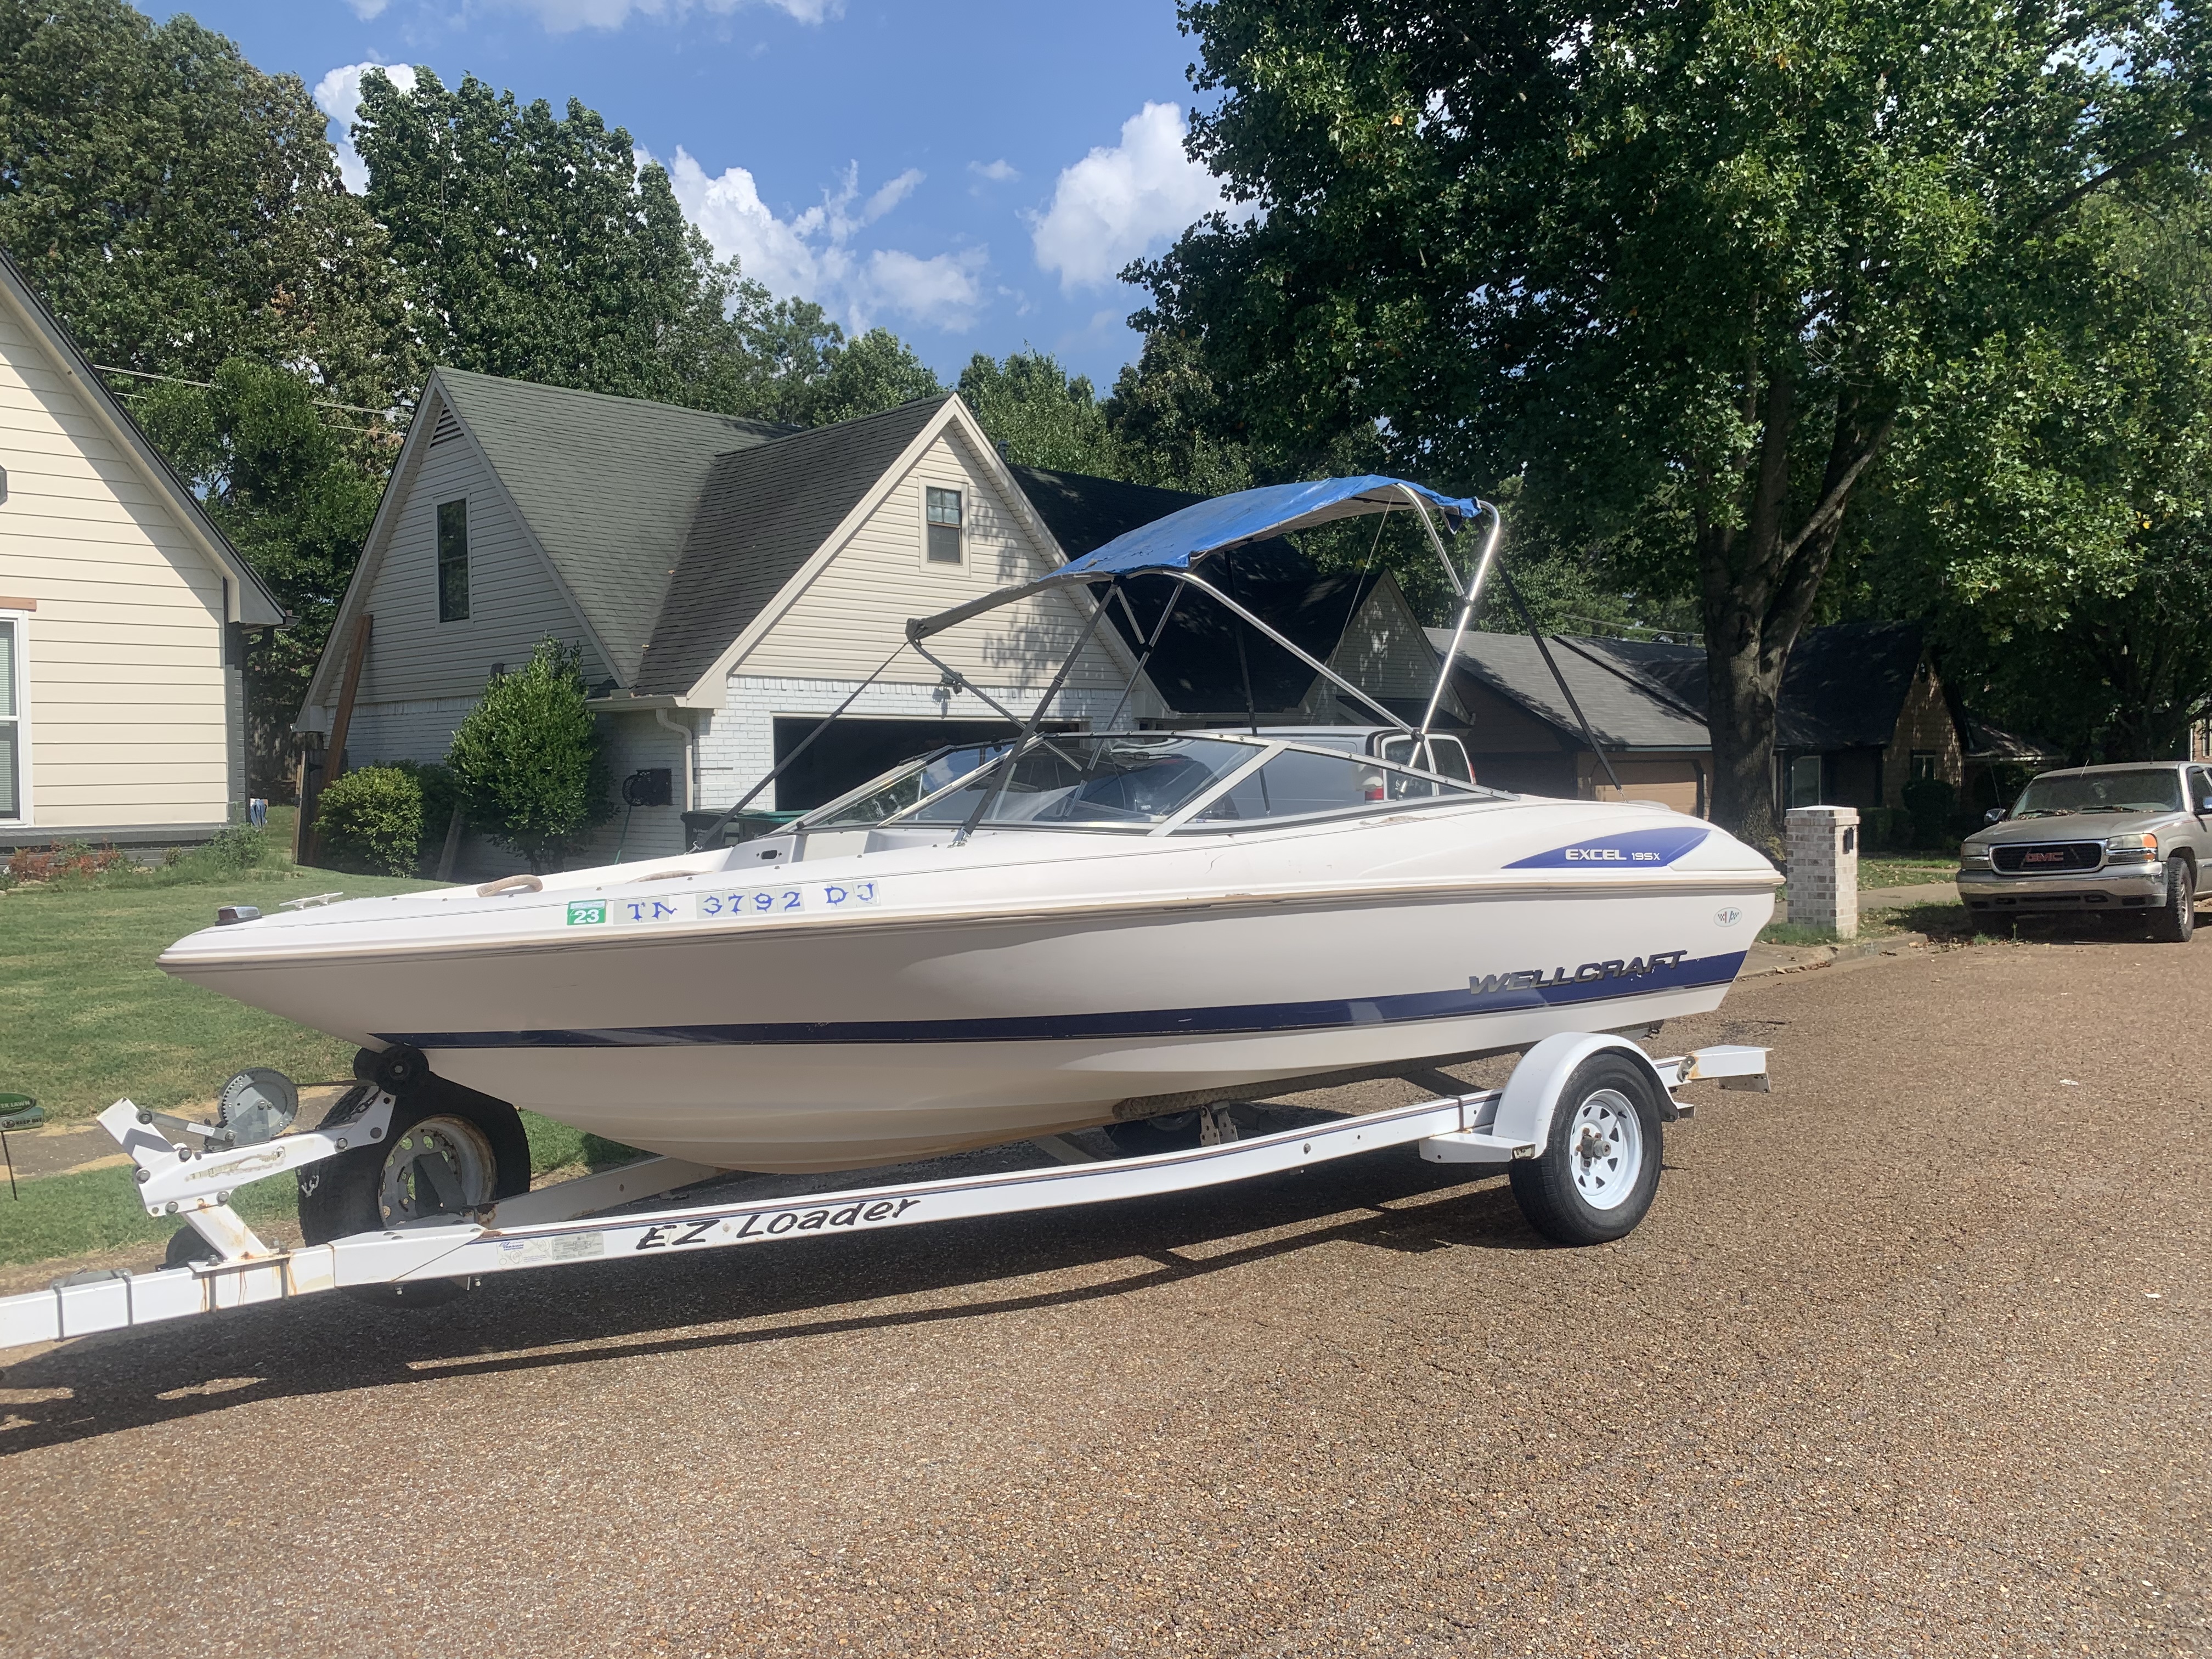 1996 Wellcraft Excel 19sx  Power boat for sale in Bartlett, TN - image 16 